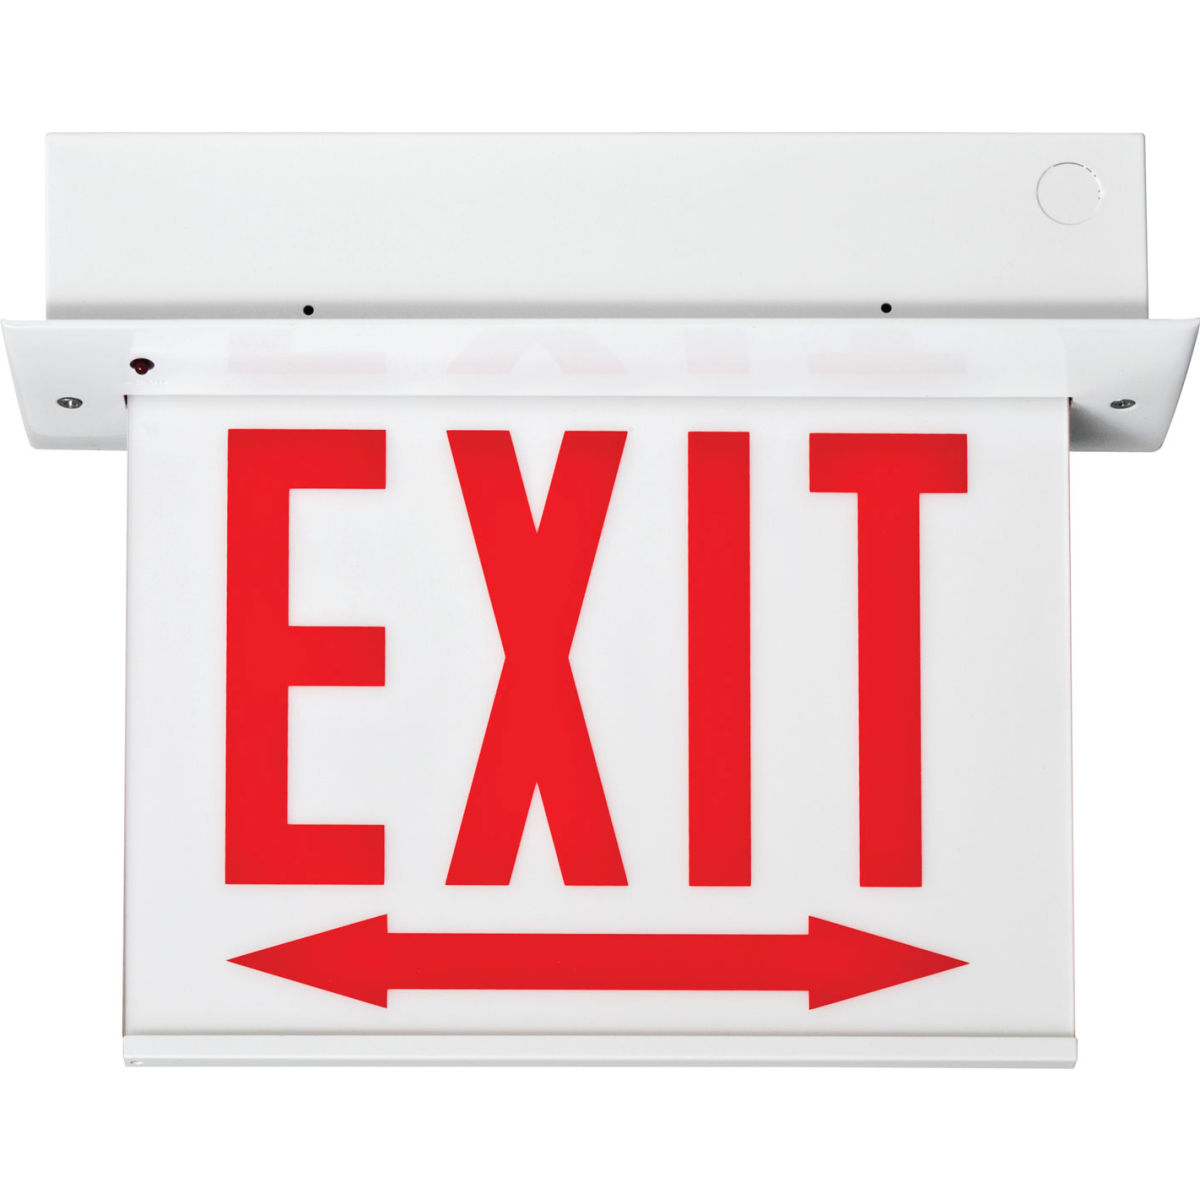 Picture of Acuity Brands B2085135 Lithonia Lighting EDGR 2 RMR EL M4 - LED Edge-Lit Exit Sign - Red